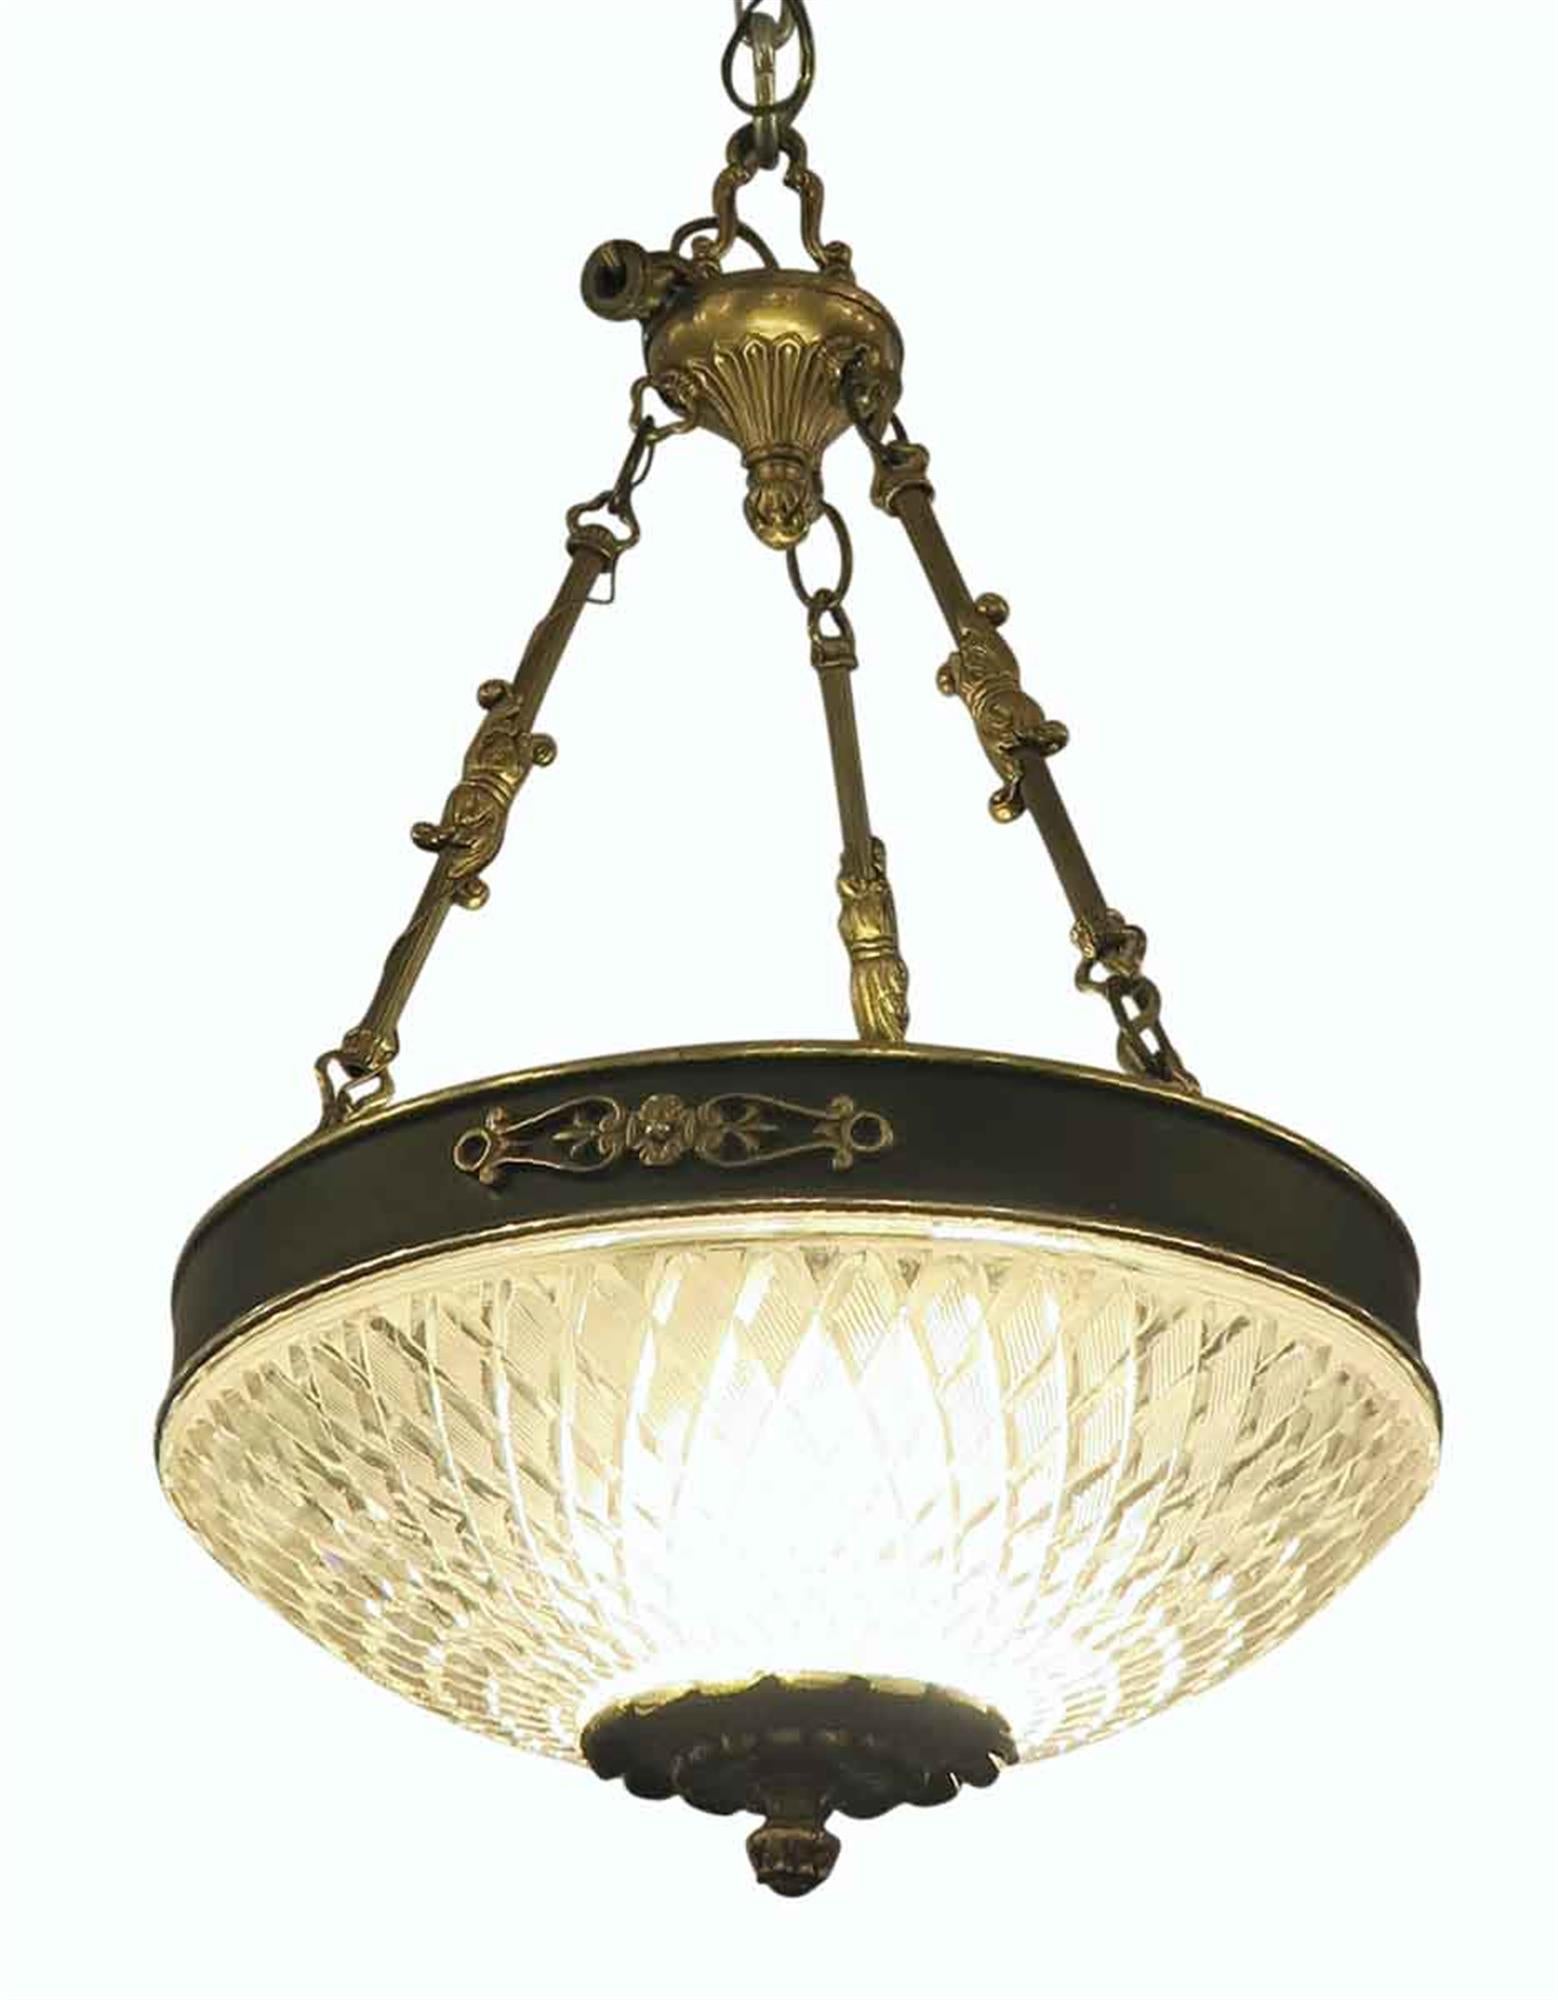 1931 Empire style pendant light chandelier with a cast glass dish and bronze decorative frame. These elegant lights graced many of the main corridors of the NYC Waldorf Astoria Hotel. Several available at time of posting. Priced each. Please